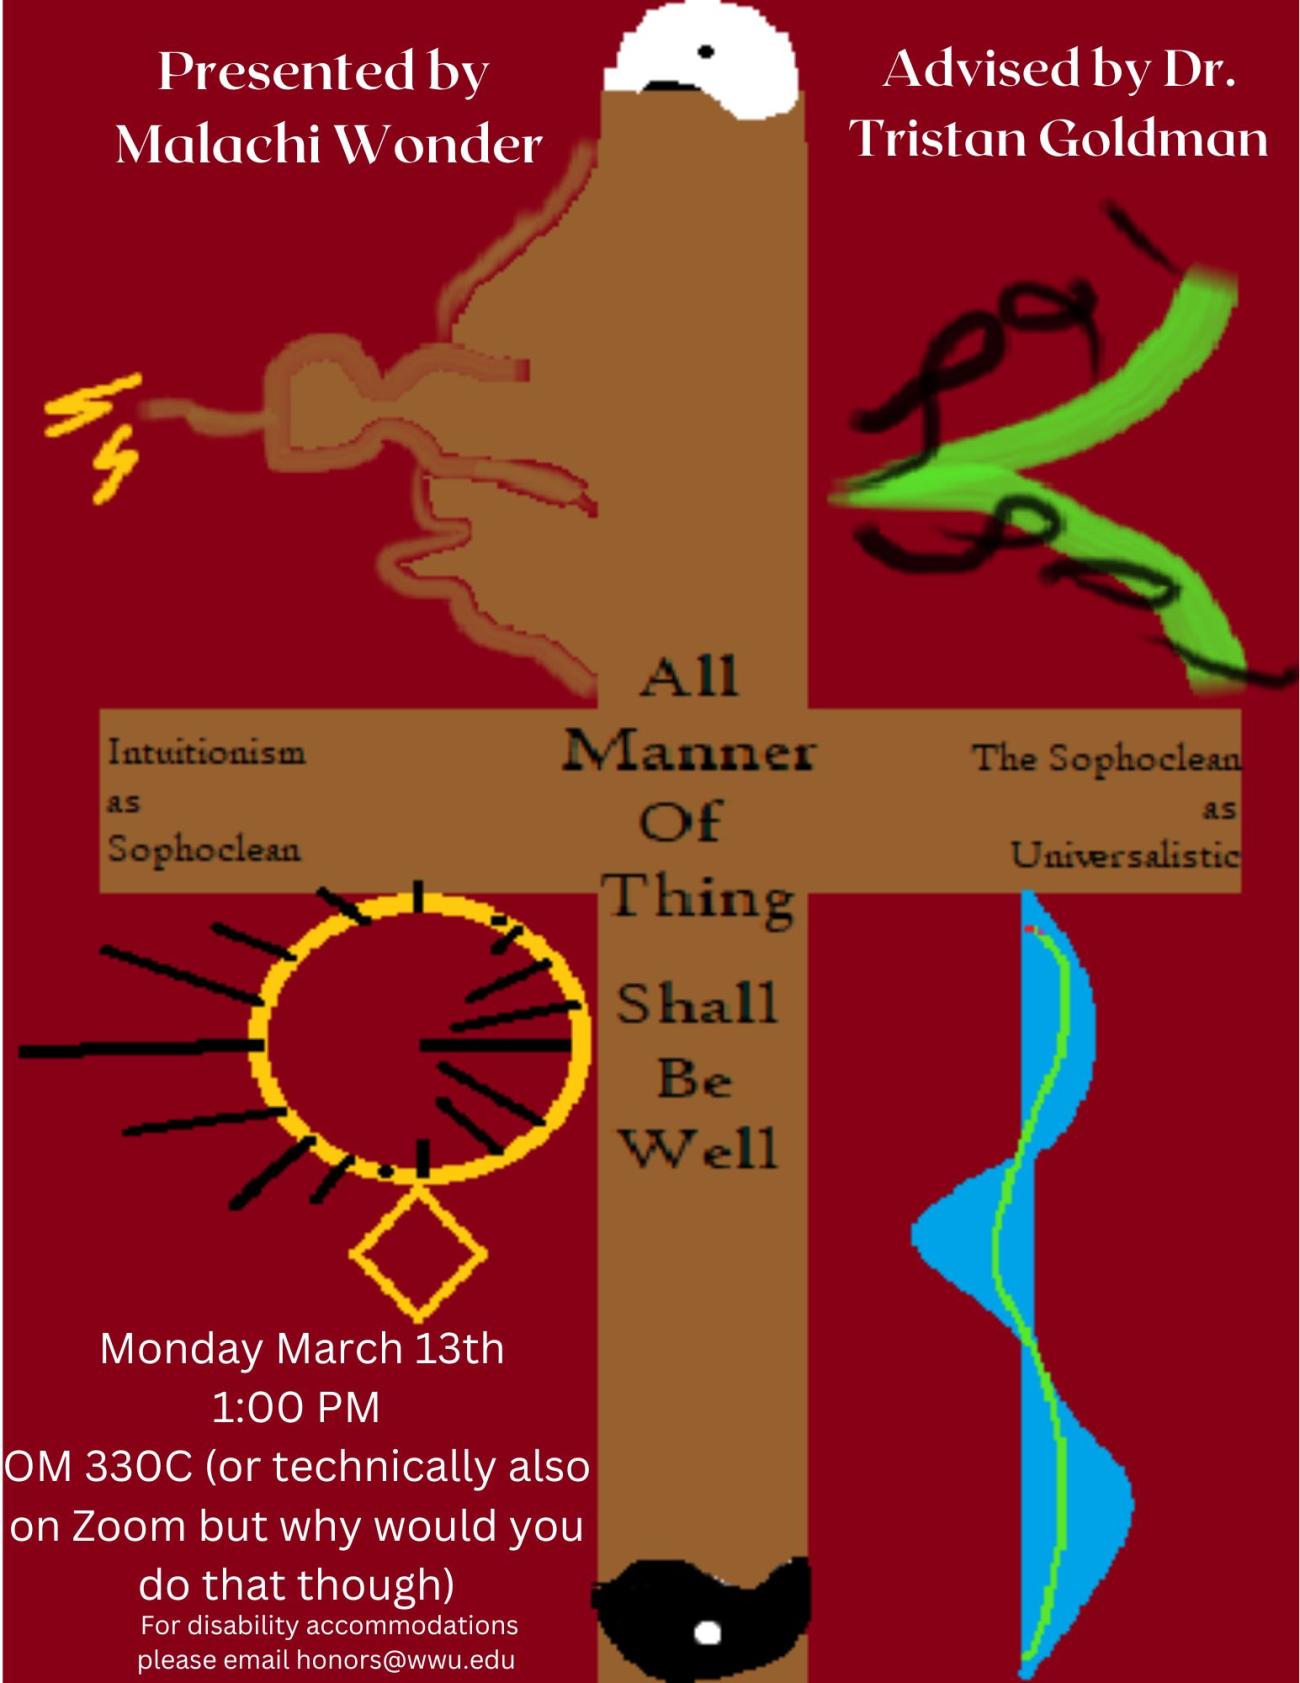 A poster with a cross and a divided yin-yang symbol. The cross fades into a city, with a central tower being struck by lightning. Other yellow, green, and blue illustrations fill the space. Text reads: "All Manner of Thing Shall Be Well. Intuitionism as Sophoclean, The Sophoclean as Universalistic. Presented by Malachi Wonder, Advised by Dr. Goldman. Monday March 13 1:00 PM OM330C (or technically also on Zoom but why would you do that though).  For disability accommodations please email honors@wwu.edu."